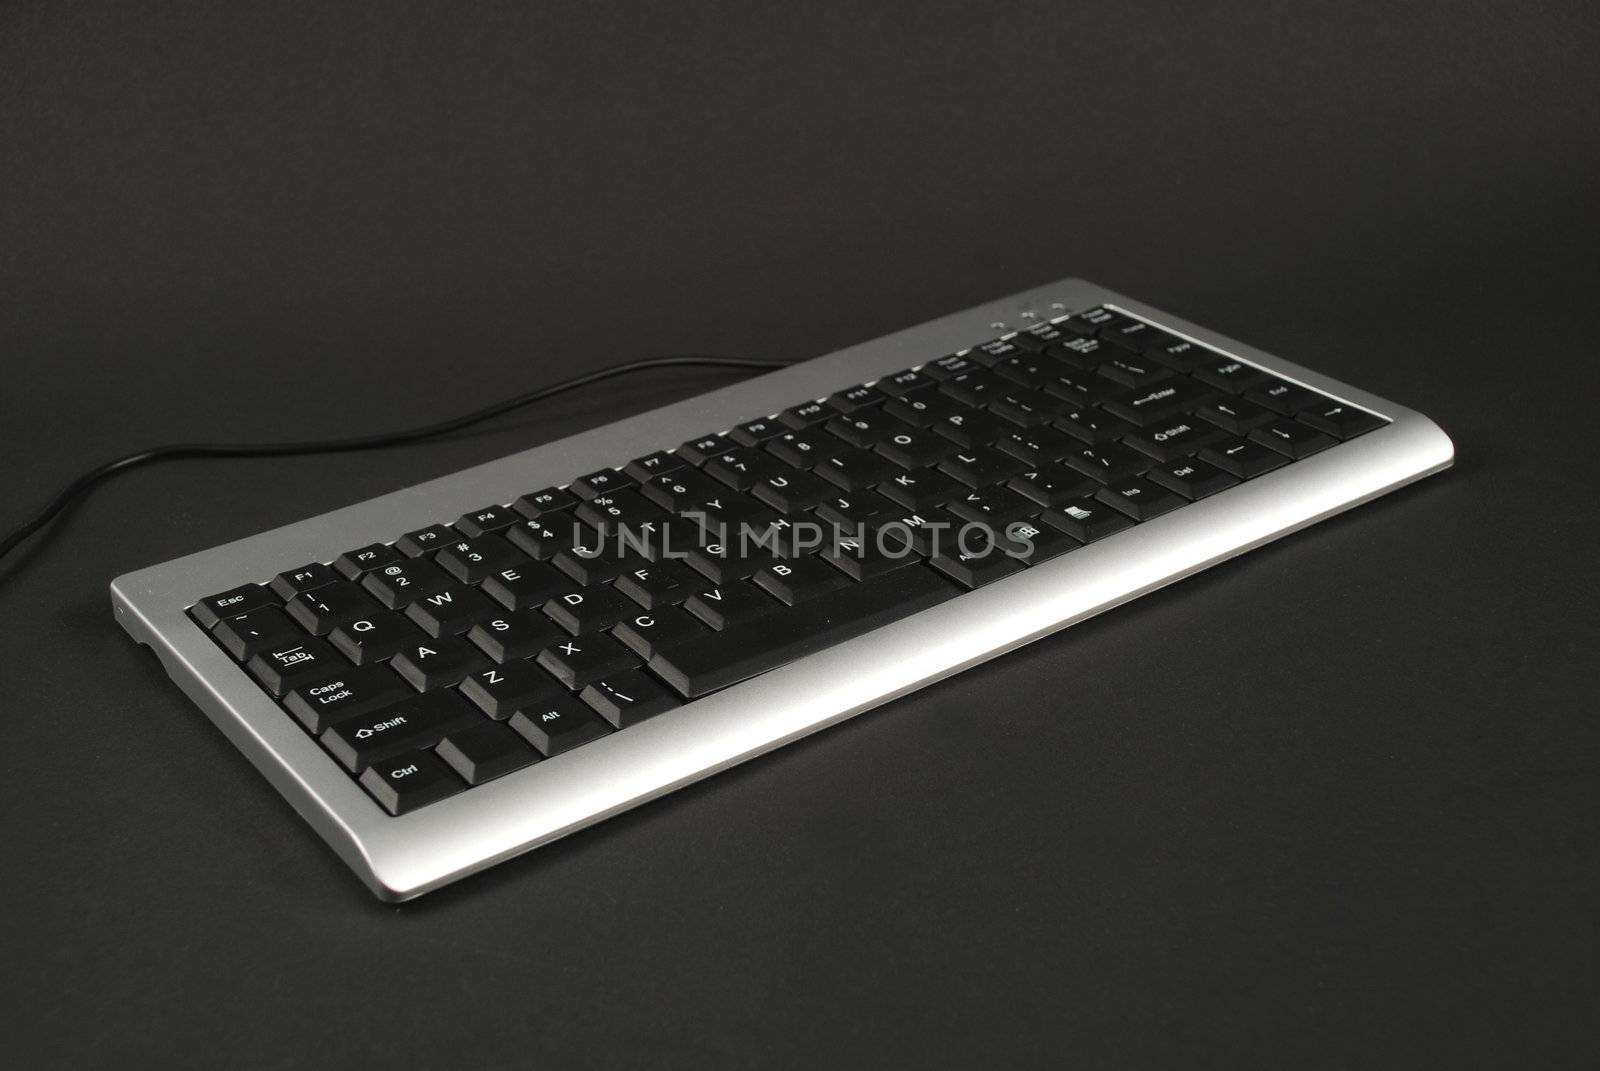 stock pictures of a portable and mobile keyboard